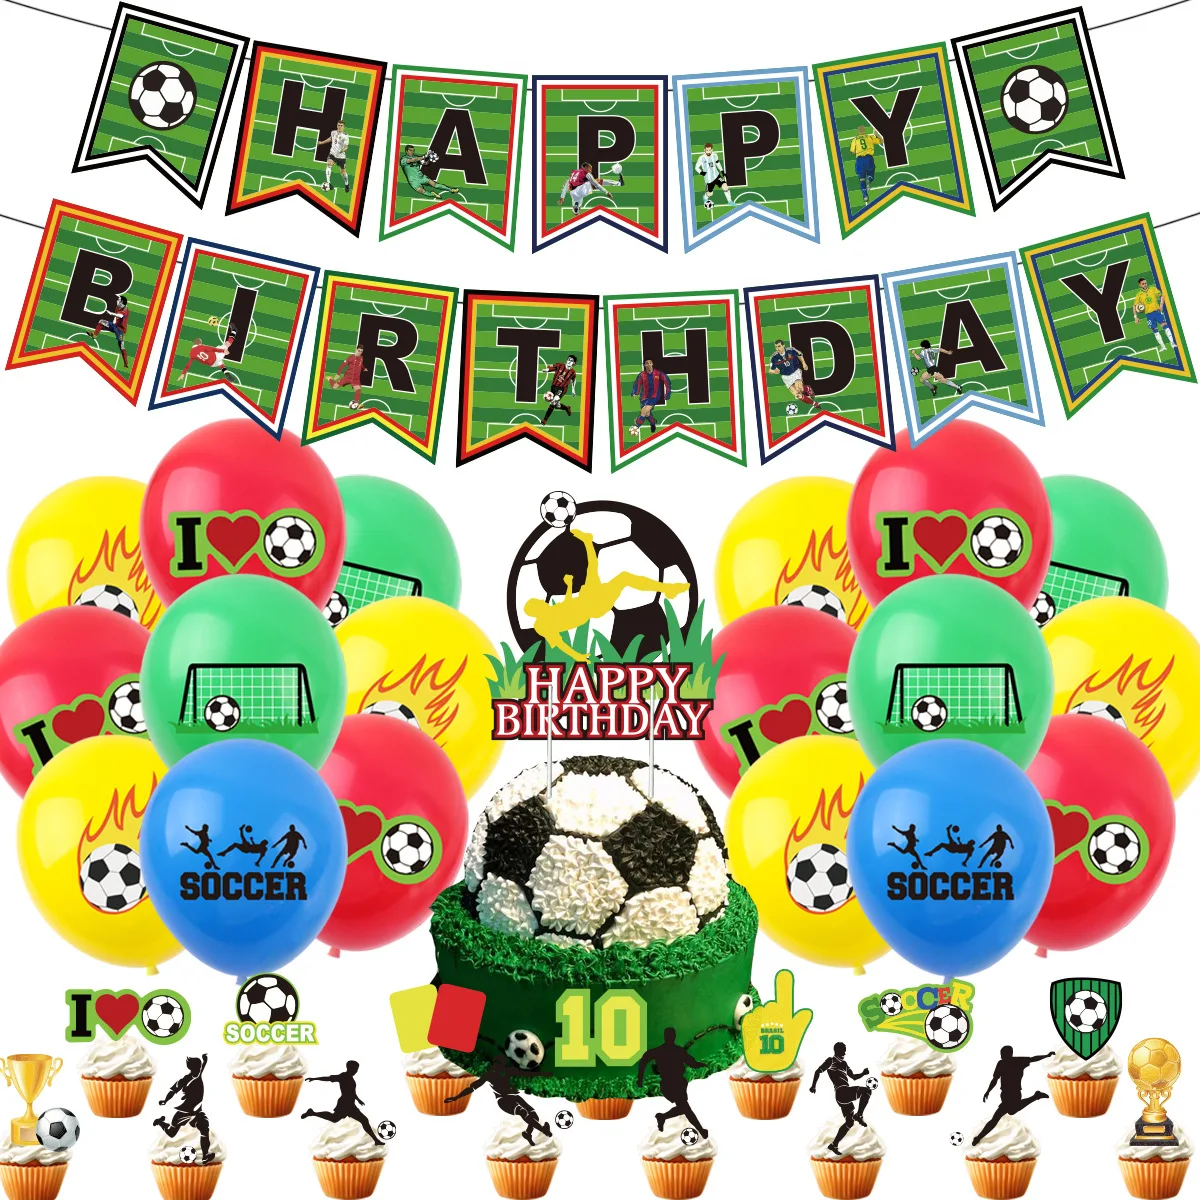 

Sursurprise Sports Party Decoration Football Balloons GOAL Banner Cake Topper Kit Soccer Theme Birthday Party Decor Supplies